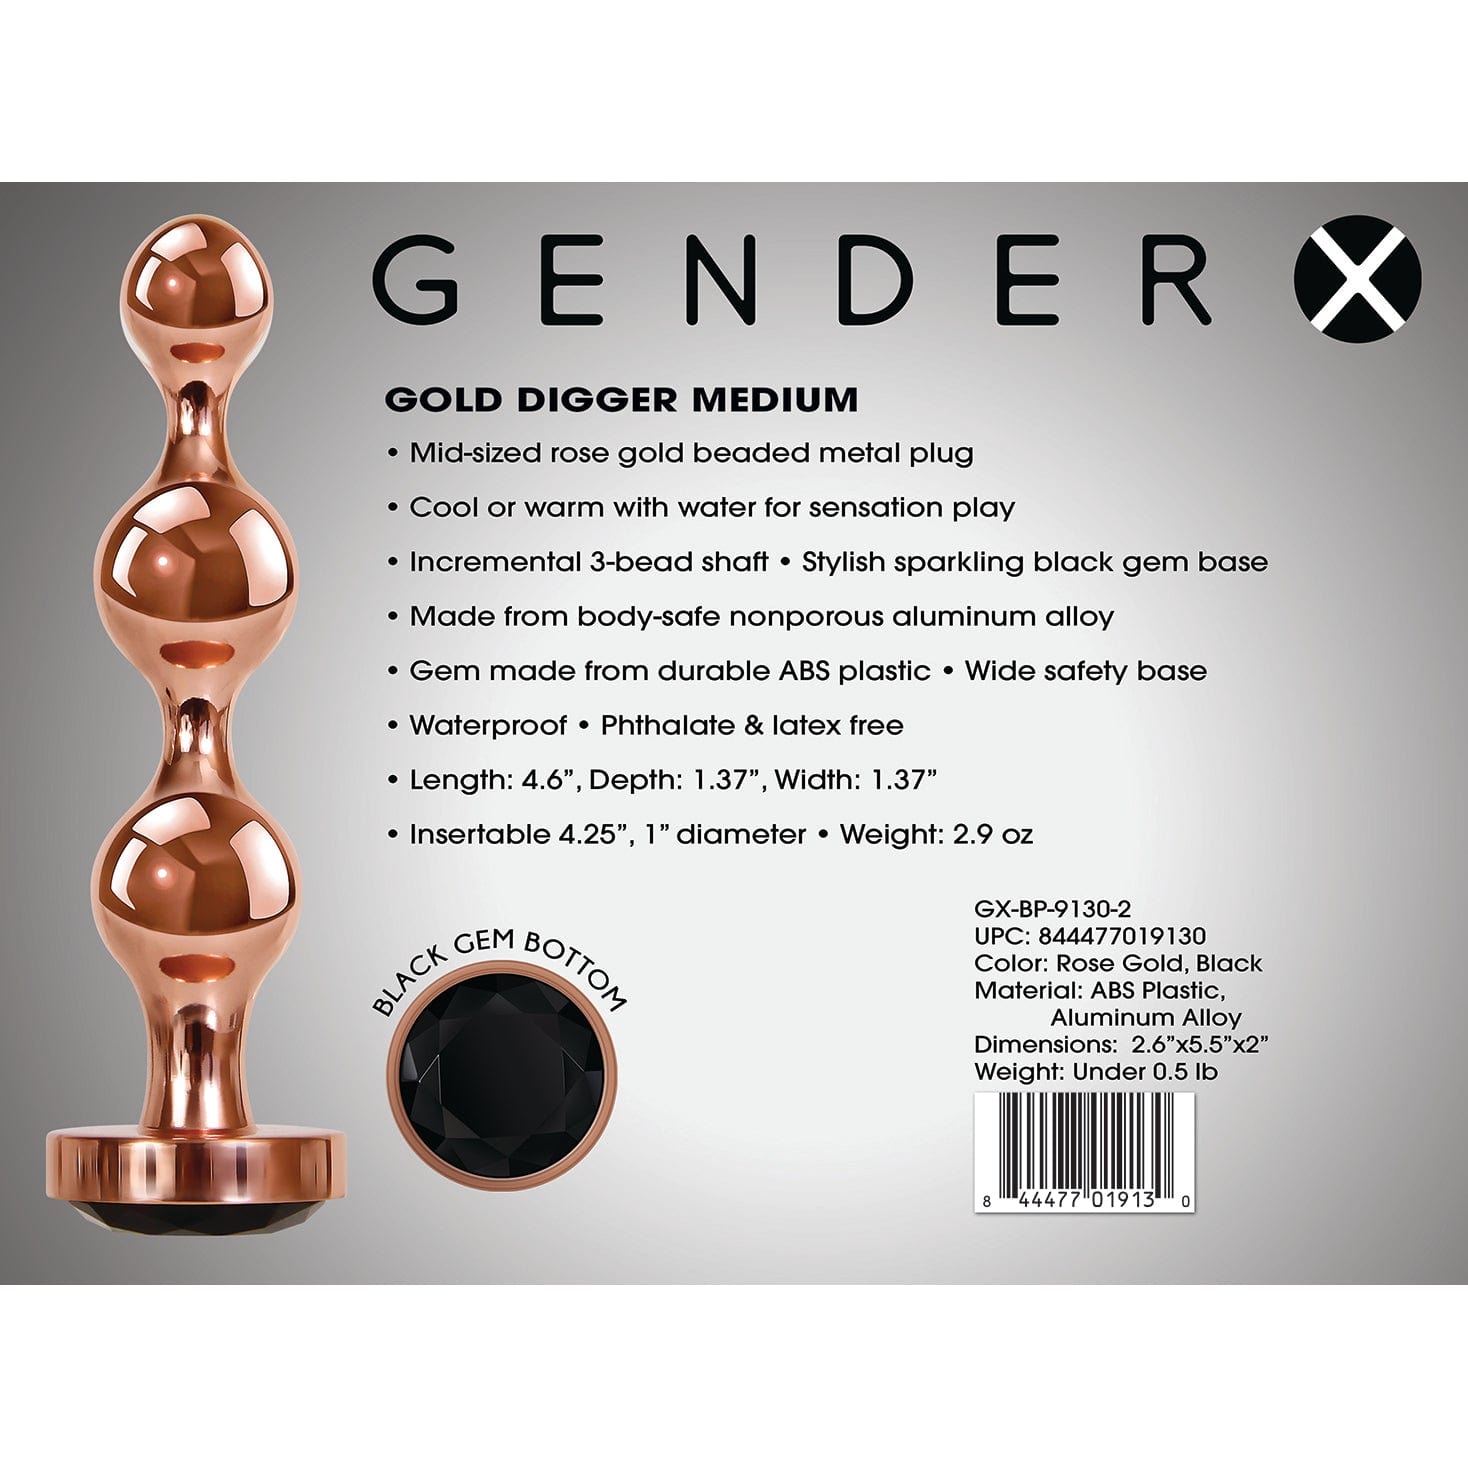 Evolved - Gender X Gold Digger Anal Beads Medium (Gold) -  Anal Beads (Non Vibration)  Durio.sg